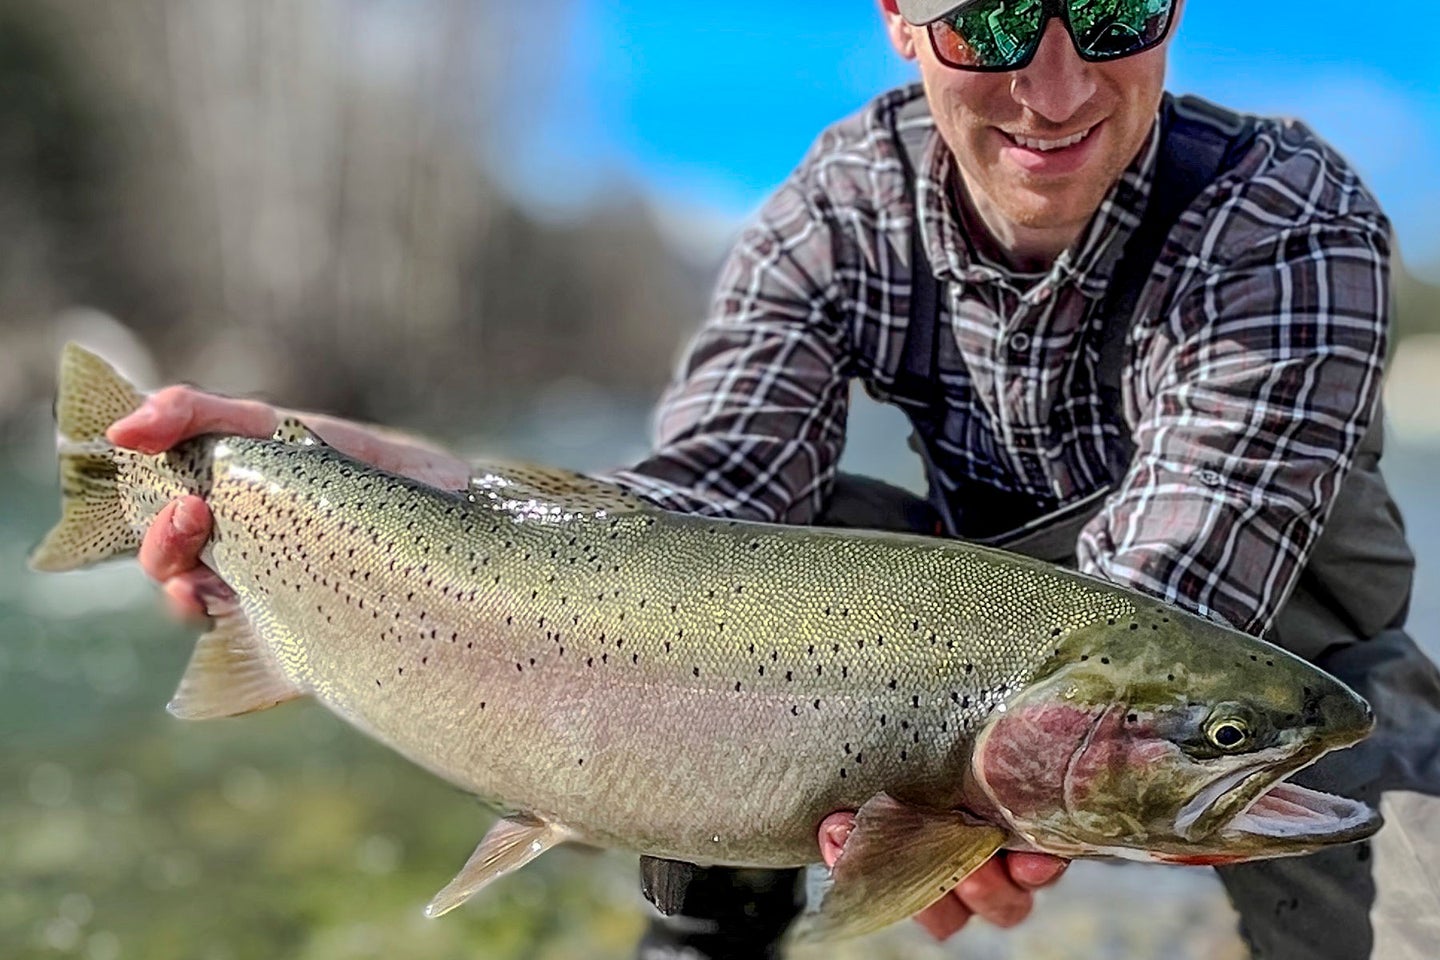 An angler poses with a state-record trout.